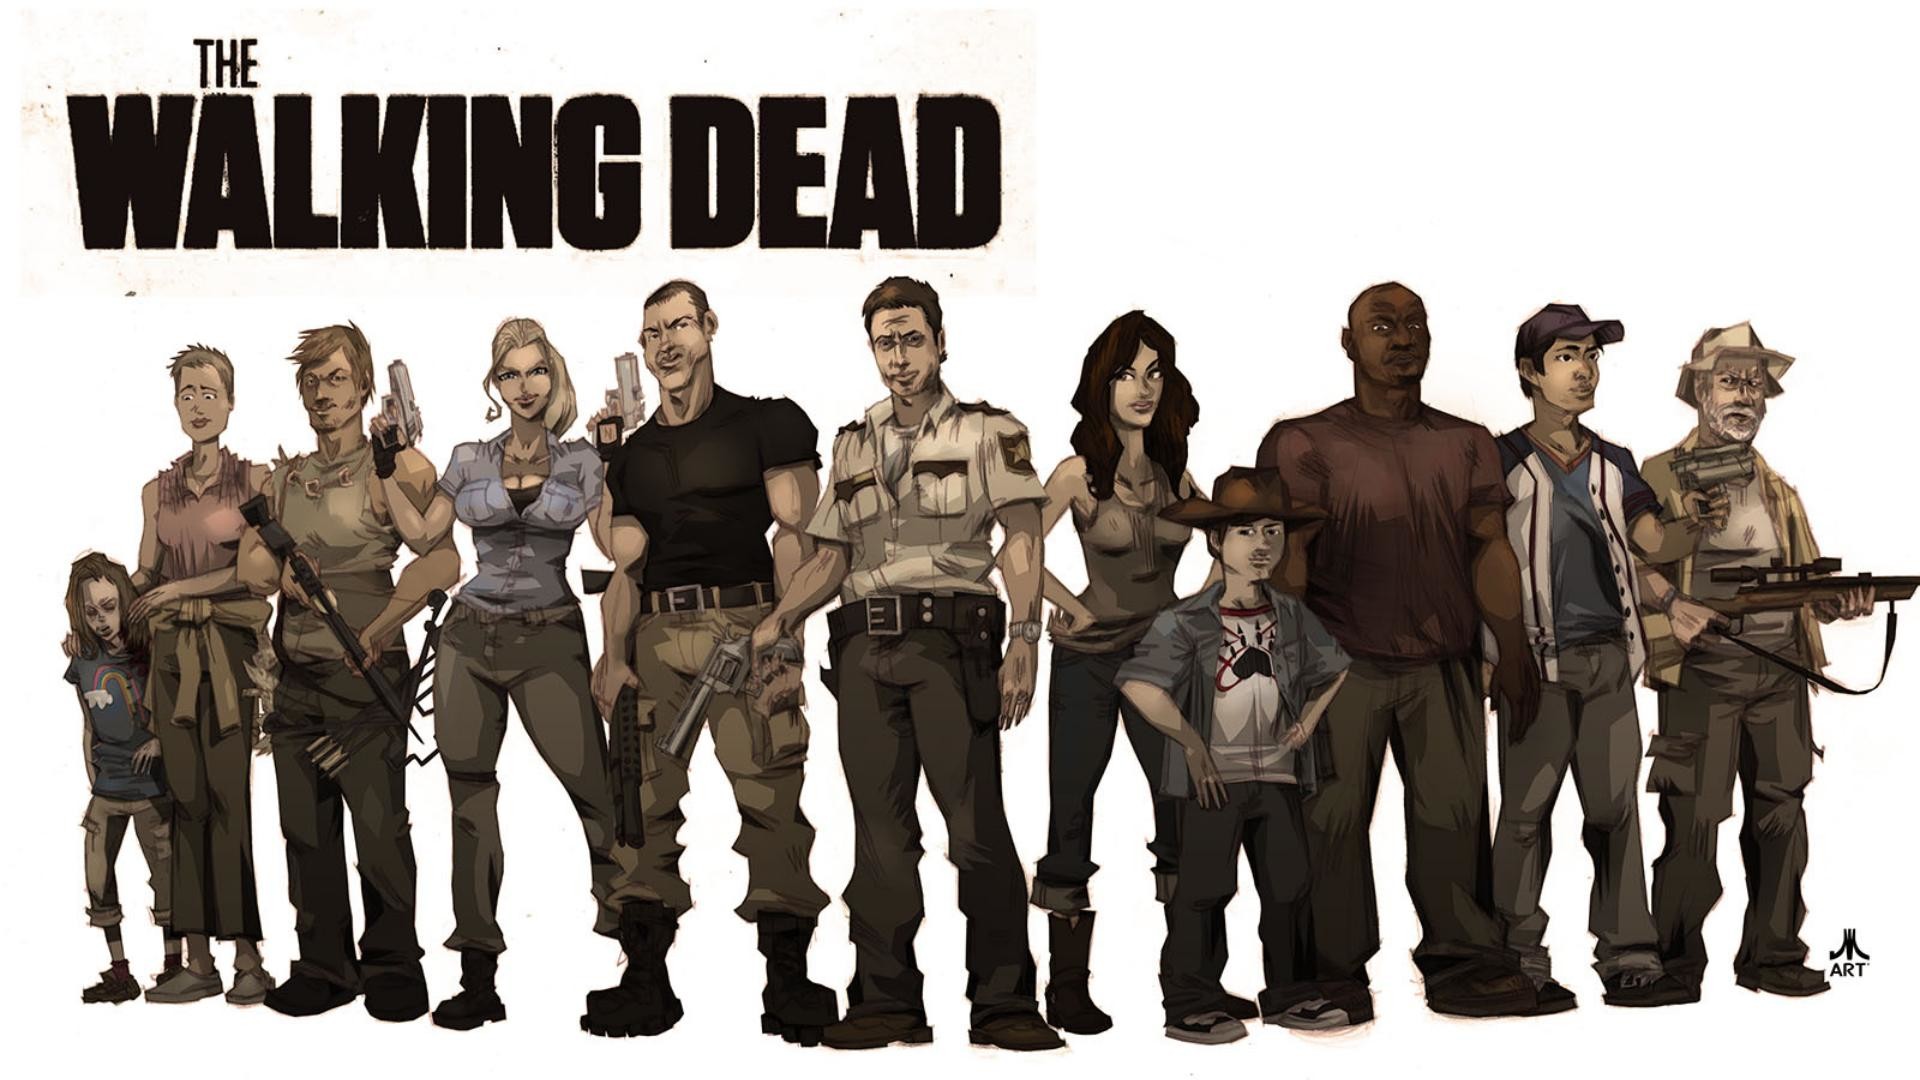 the walking dead wallpaper,social group,crew,team,workwear,personal protective equipment